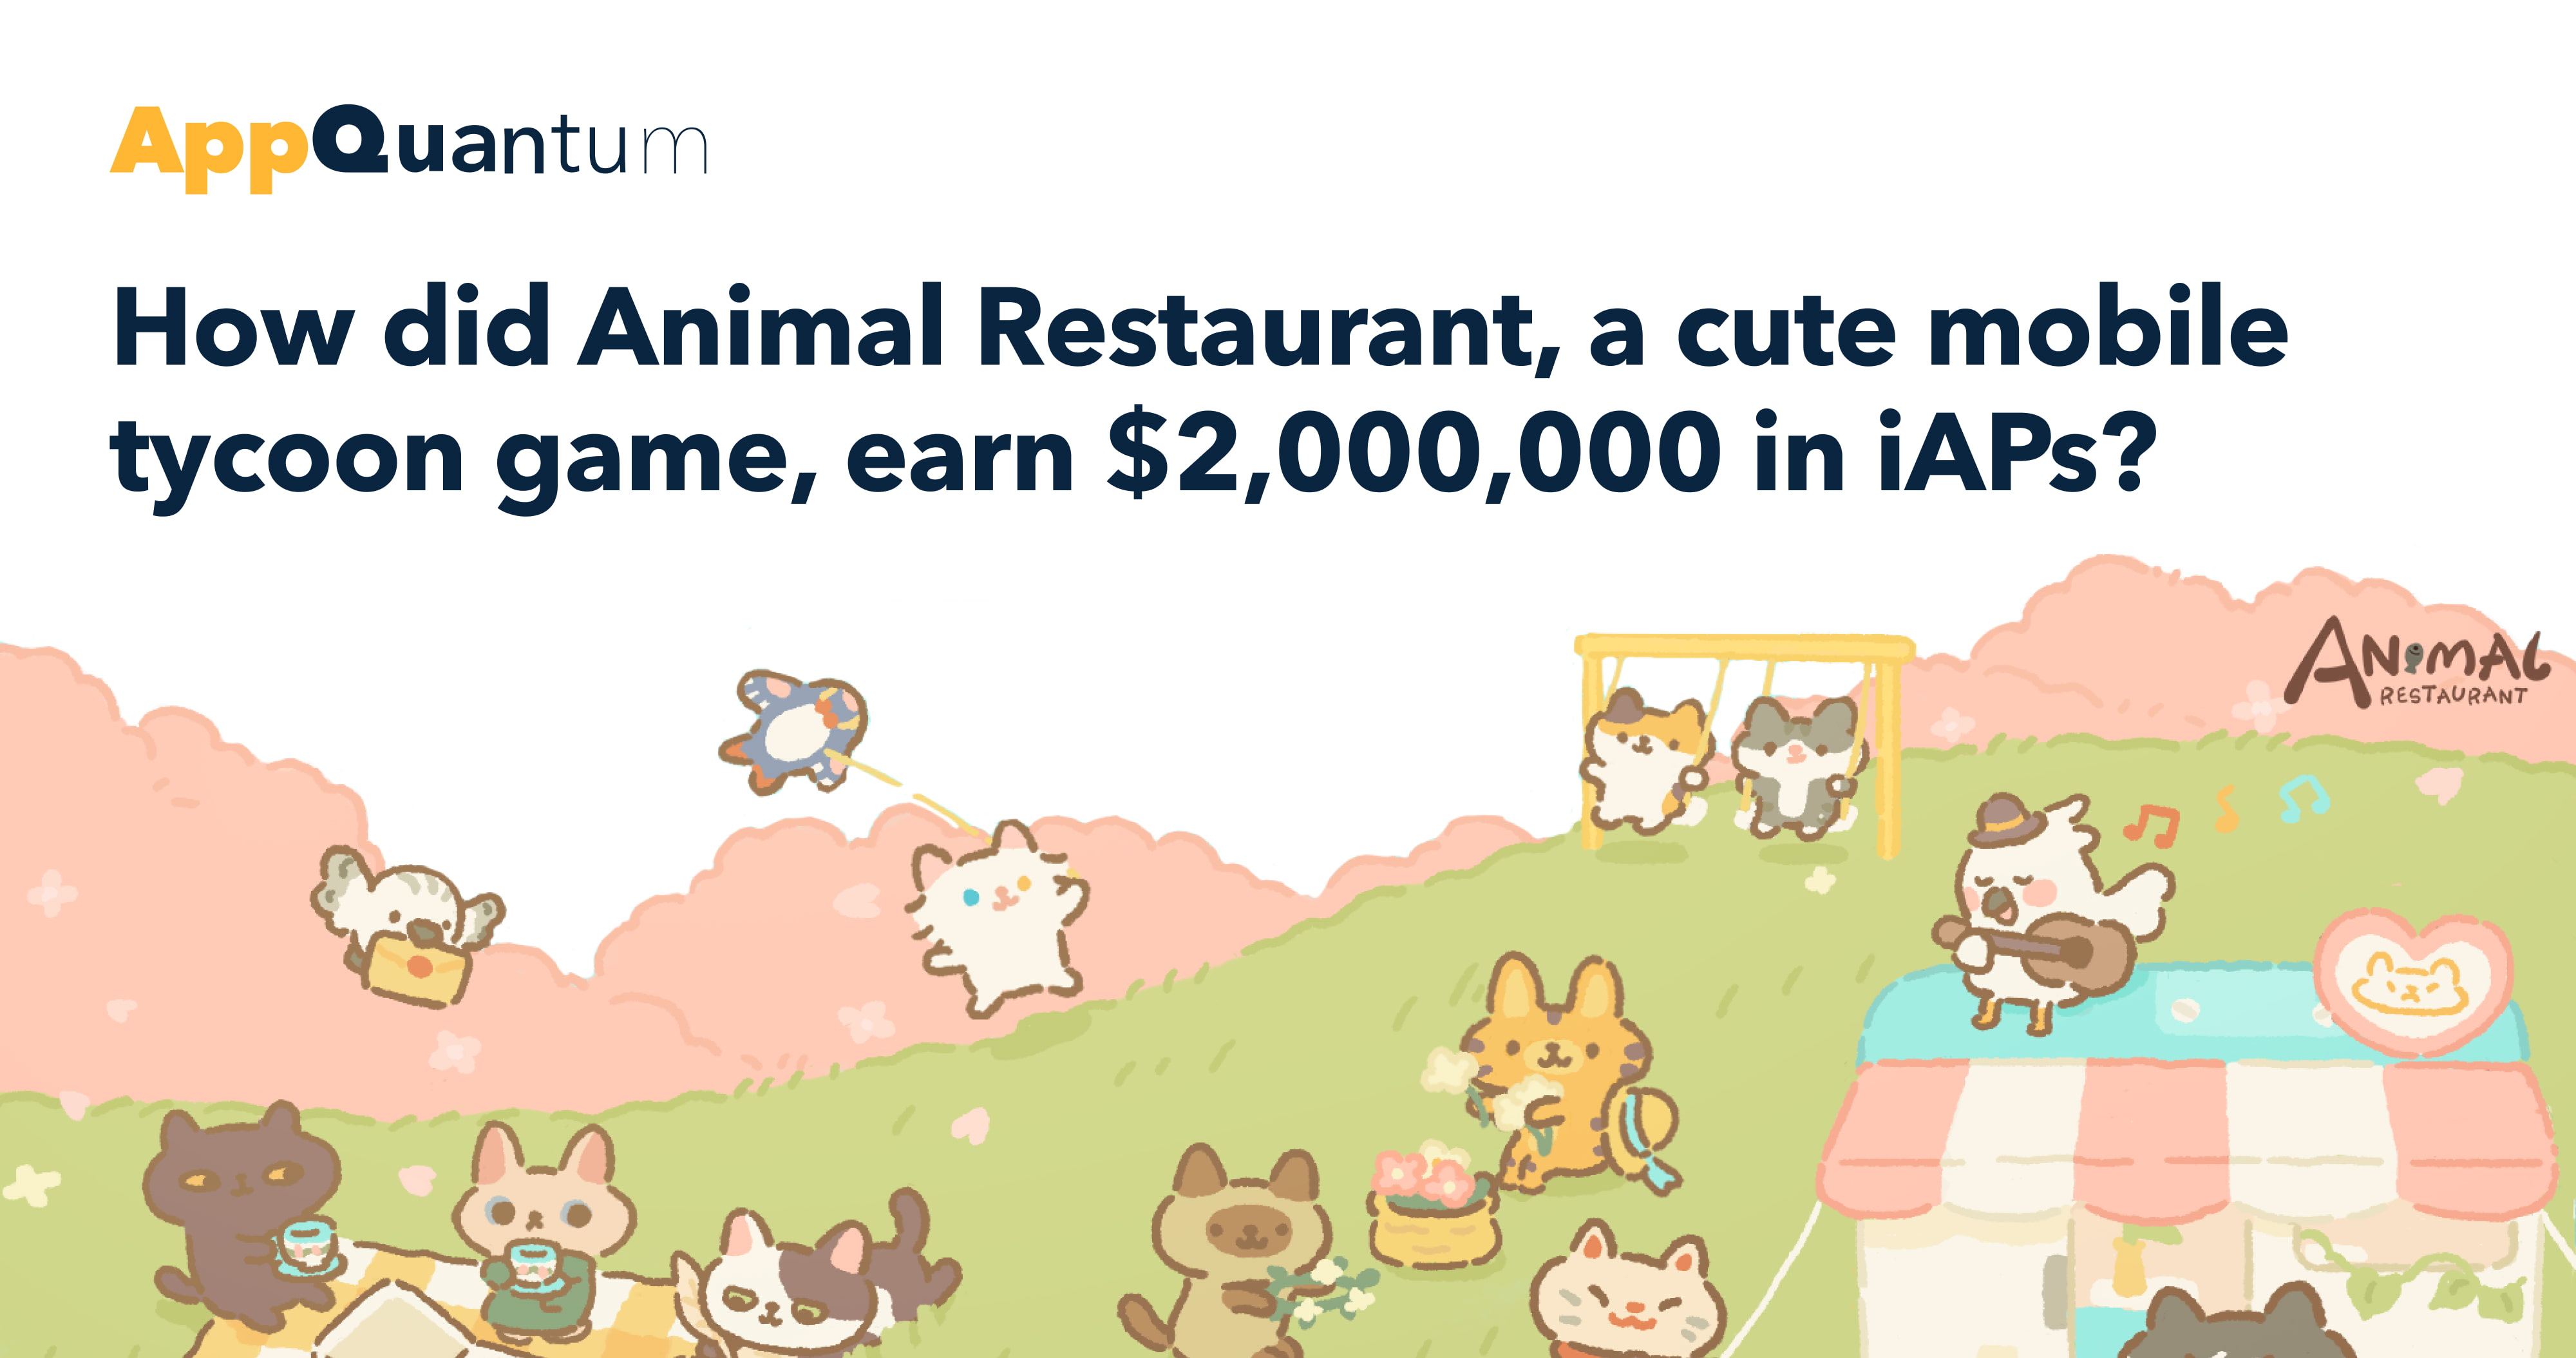 AppQuantum Deconstructs Animal Restaurant: How to Earn $2,000,000 in IAPs with a Cute Mobile Game